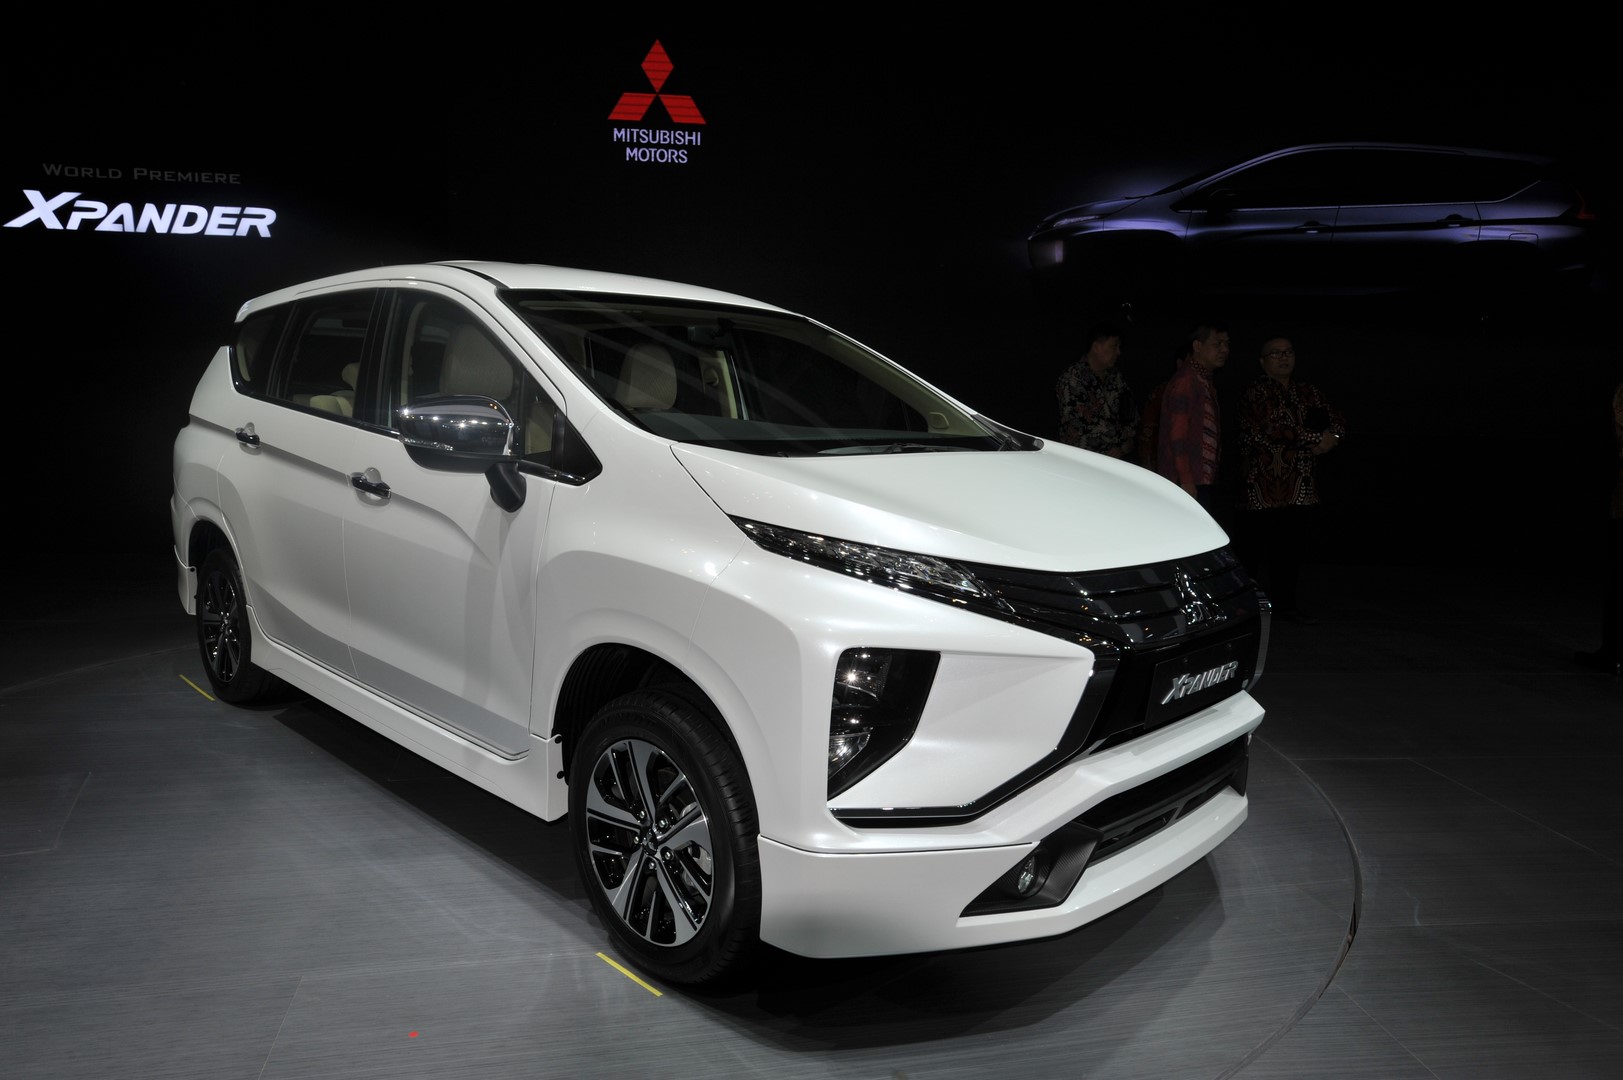 Nearly 6,000 bookings recorded for the Mitsubishi Xpander